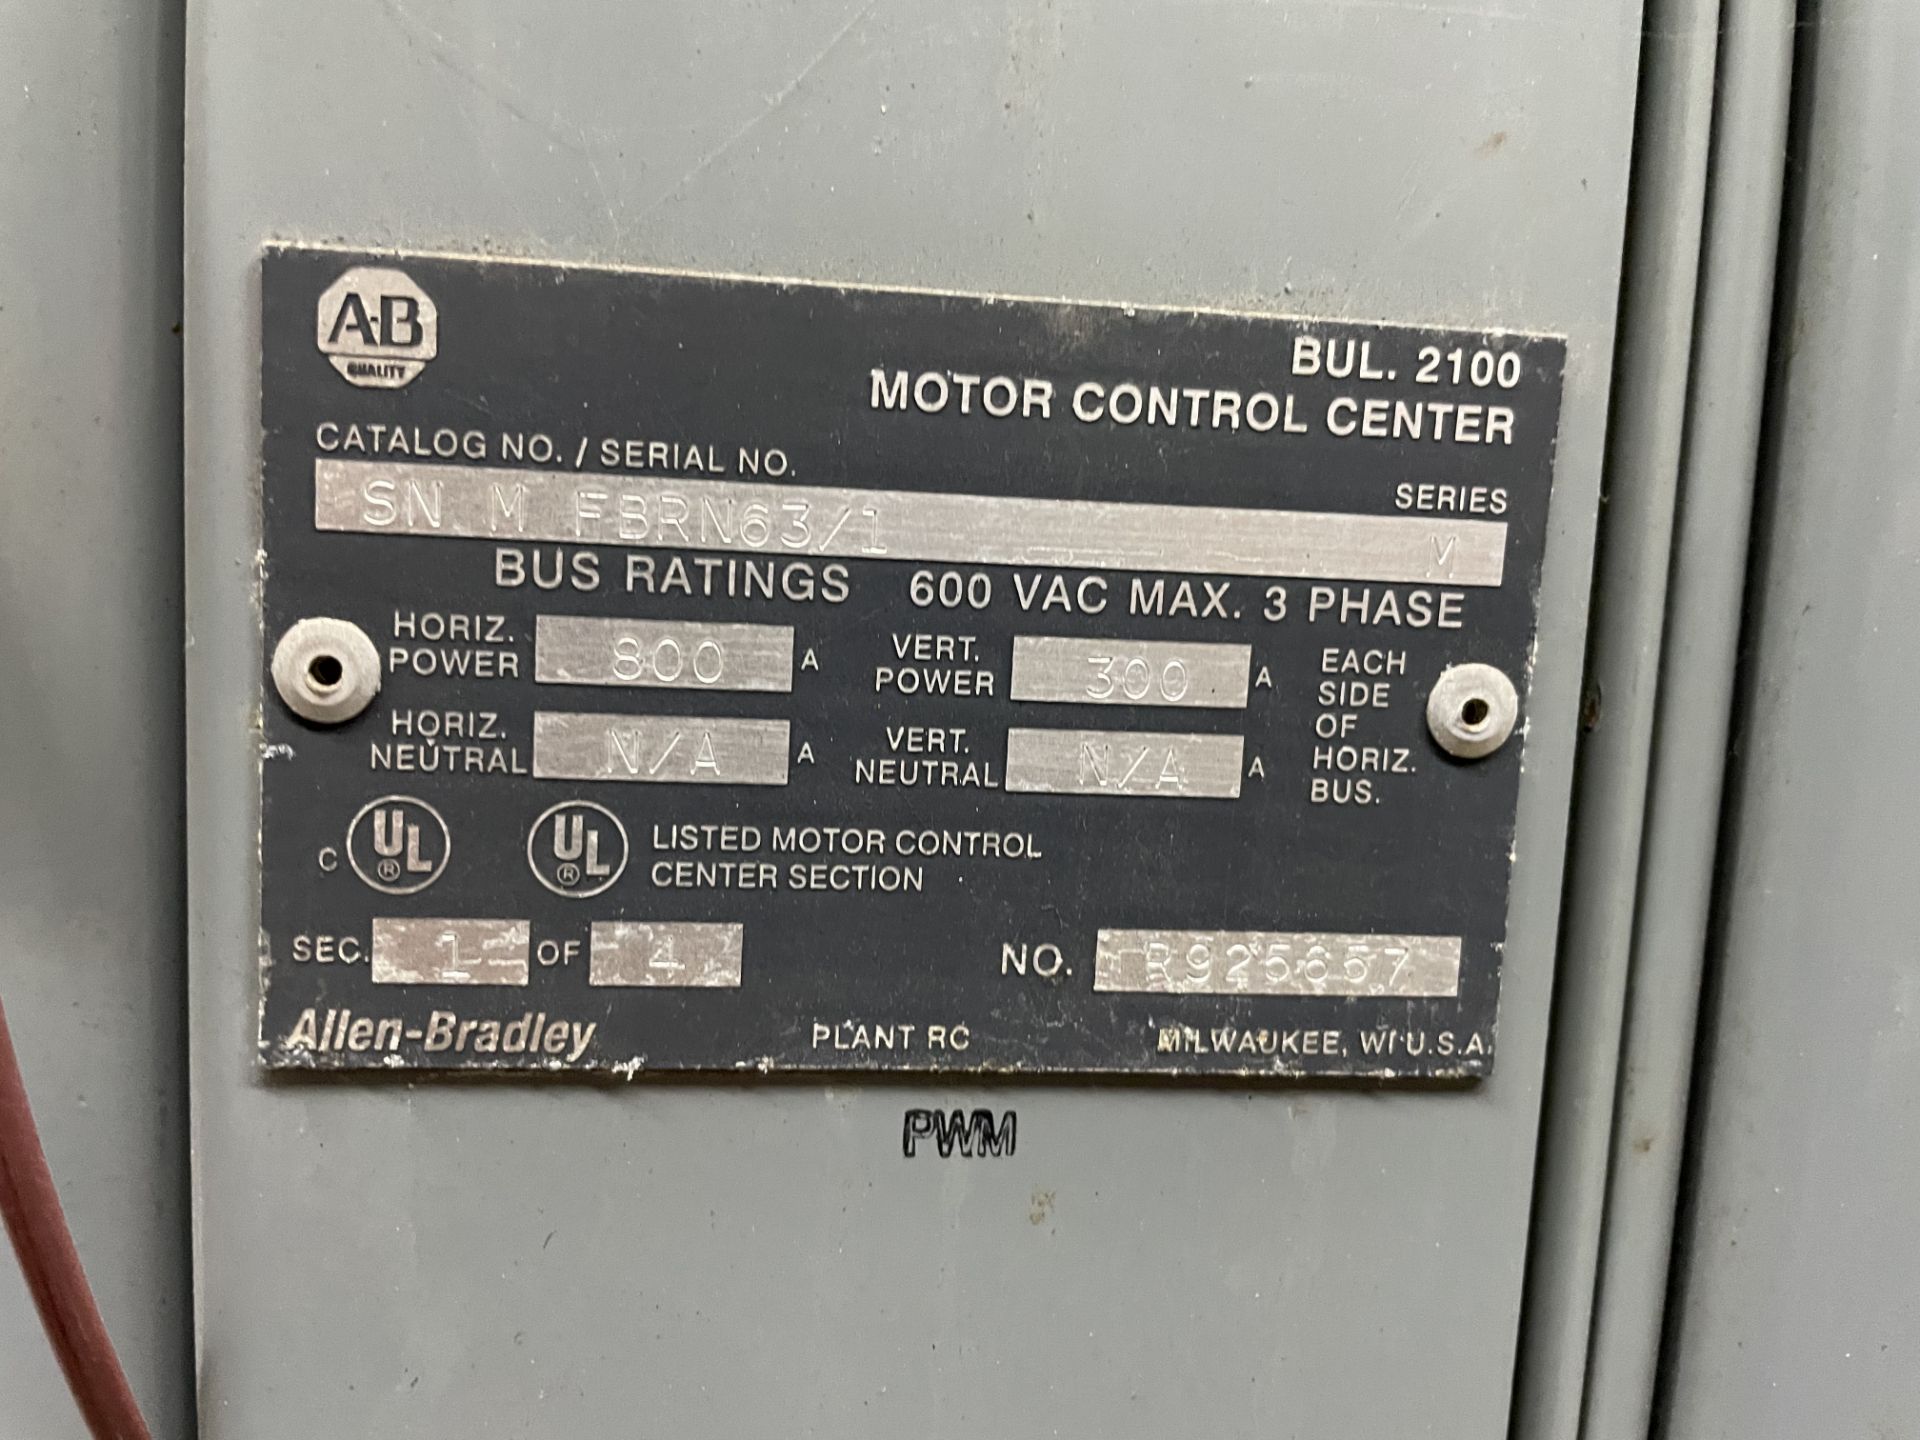 Motor Control Center - Image 3 of 3